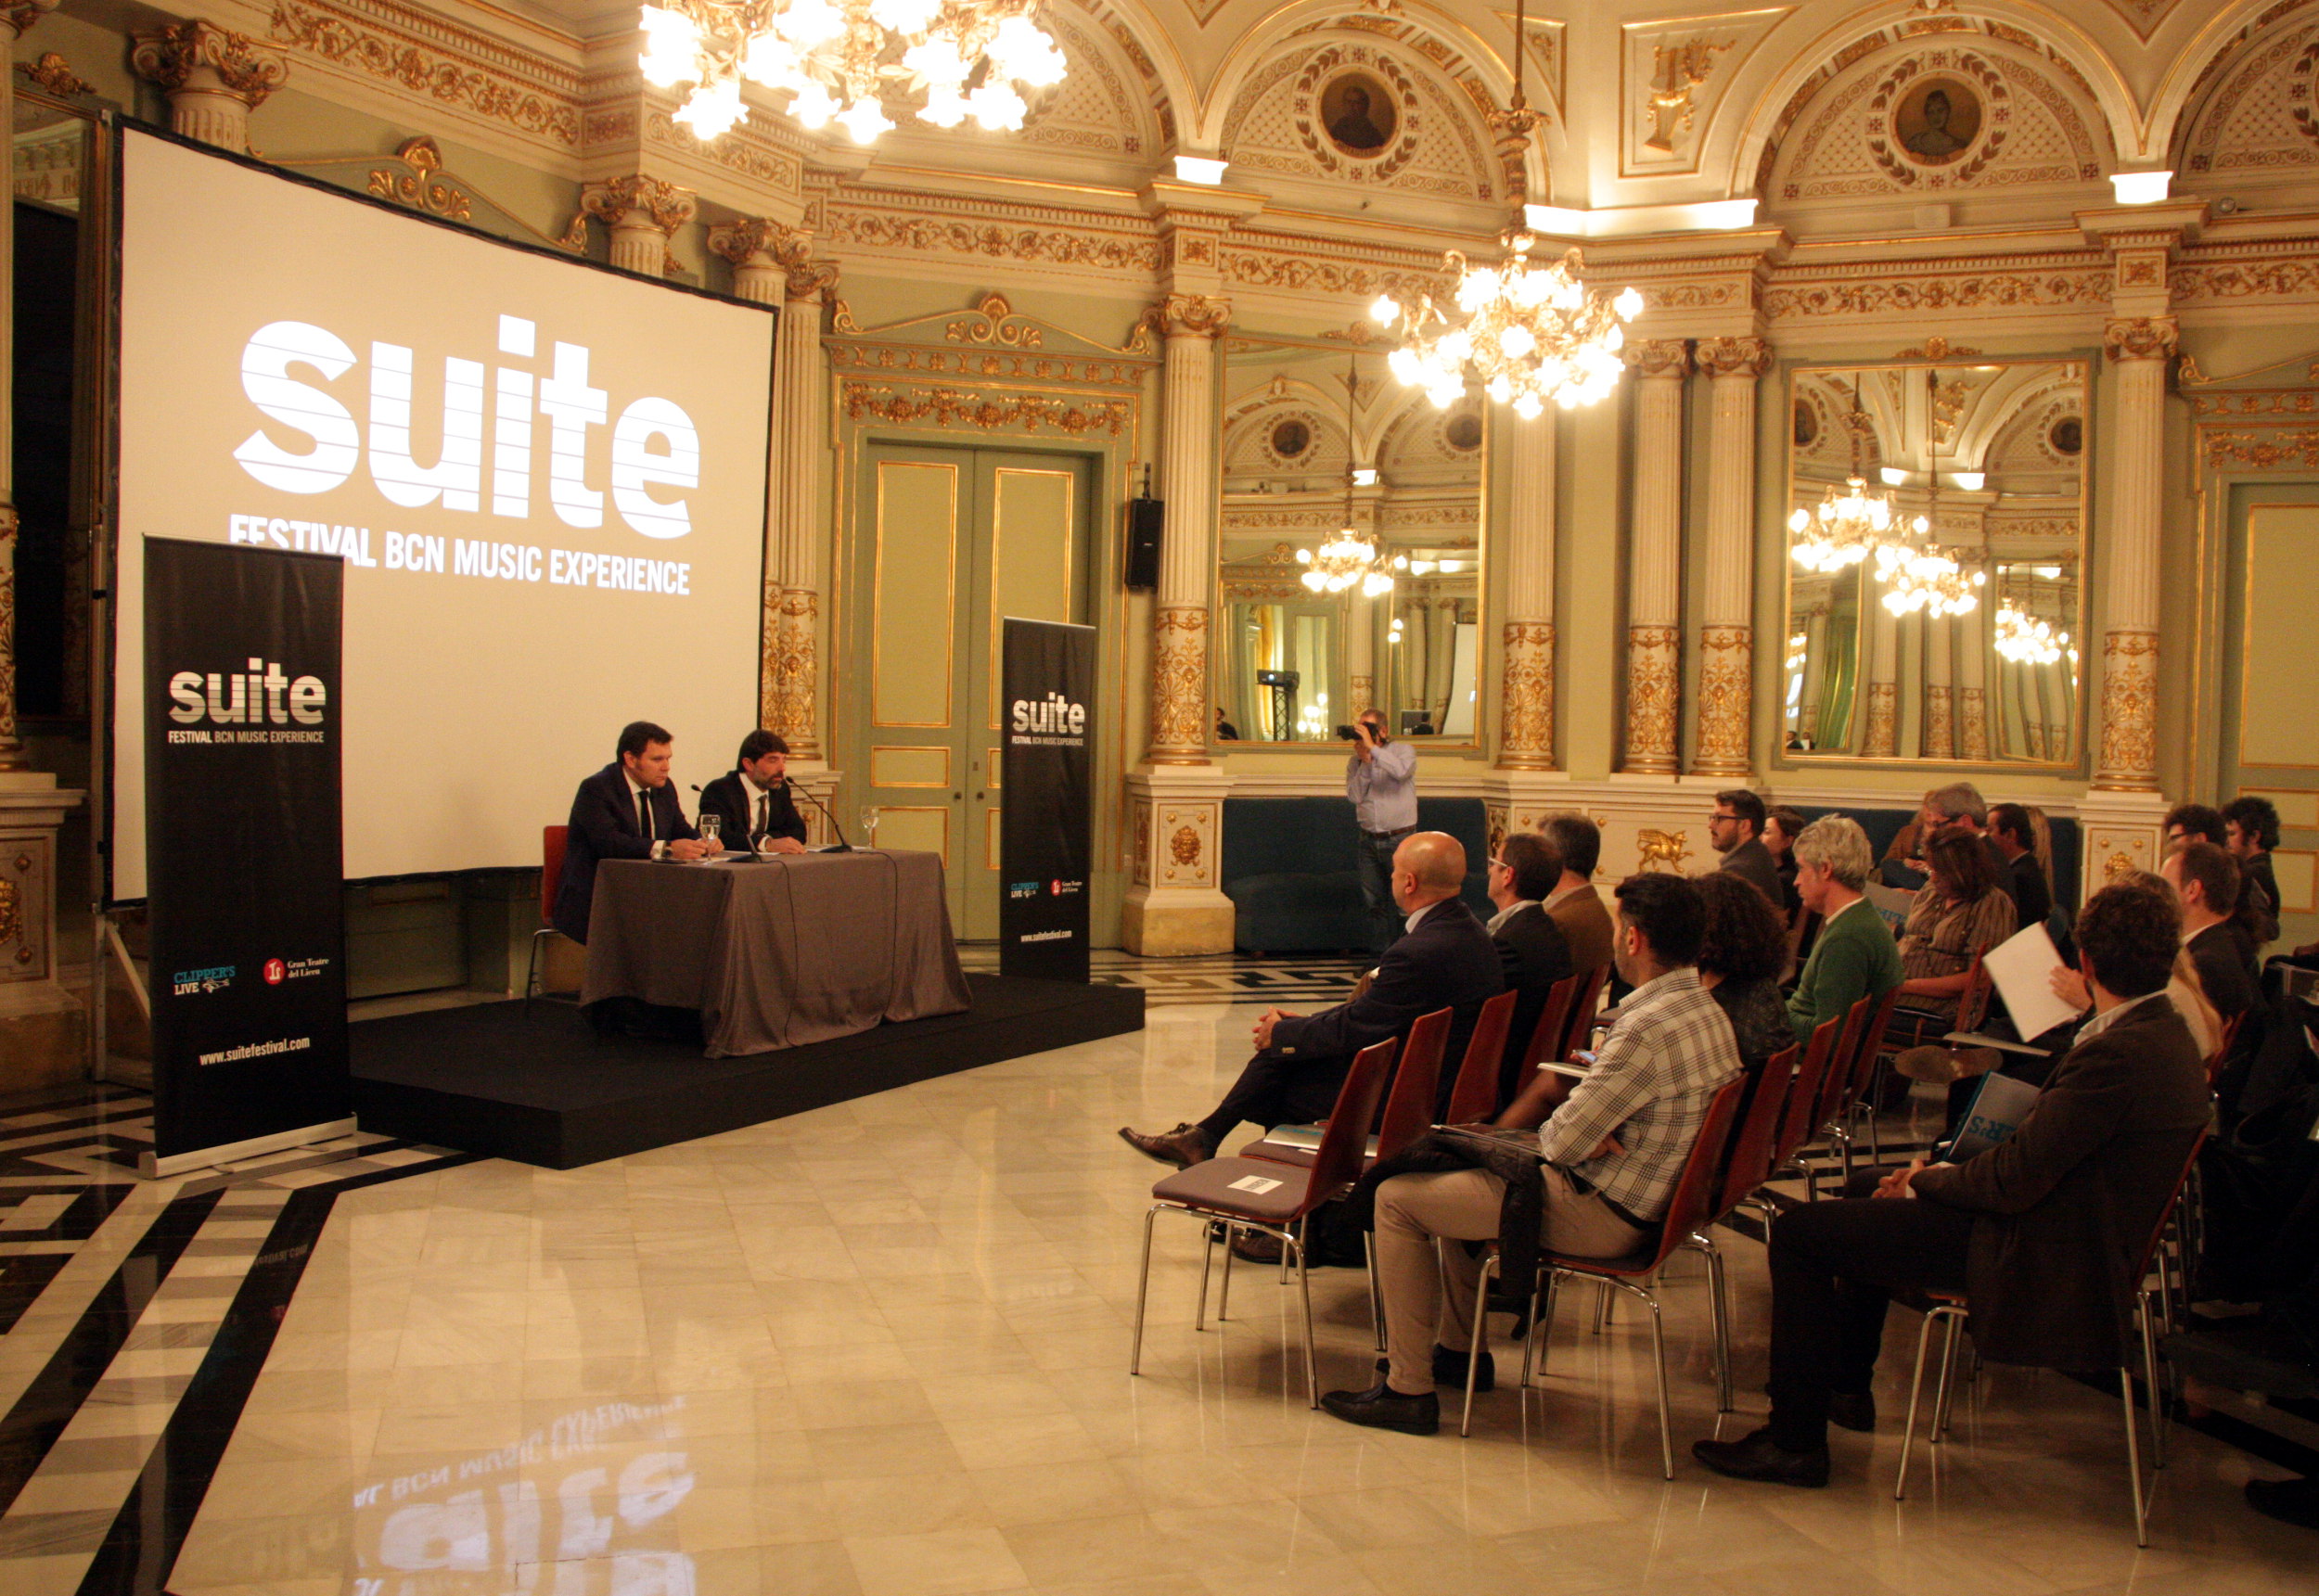 Presentation of Suite Festival before the media, at Barcelona Liceu Opera House (by ACN)